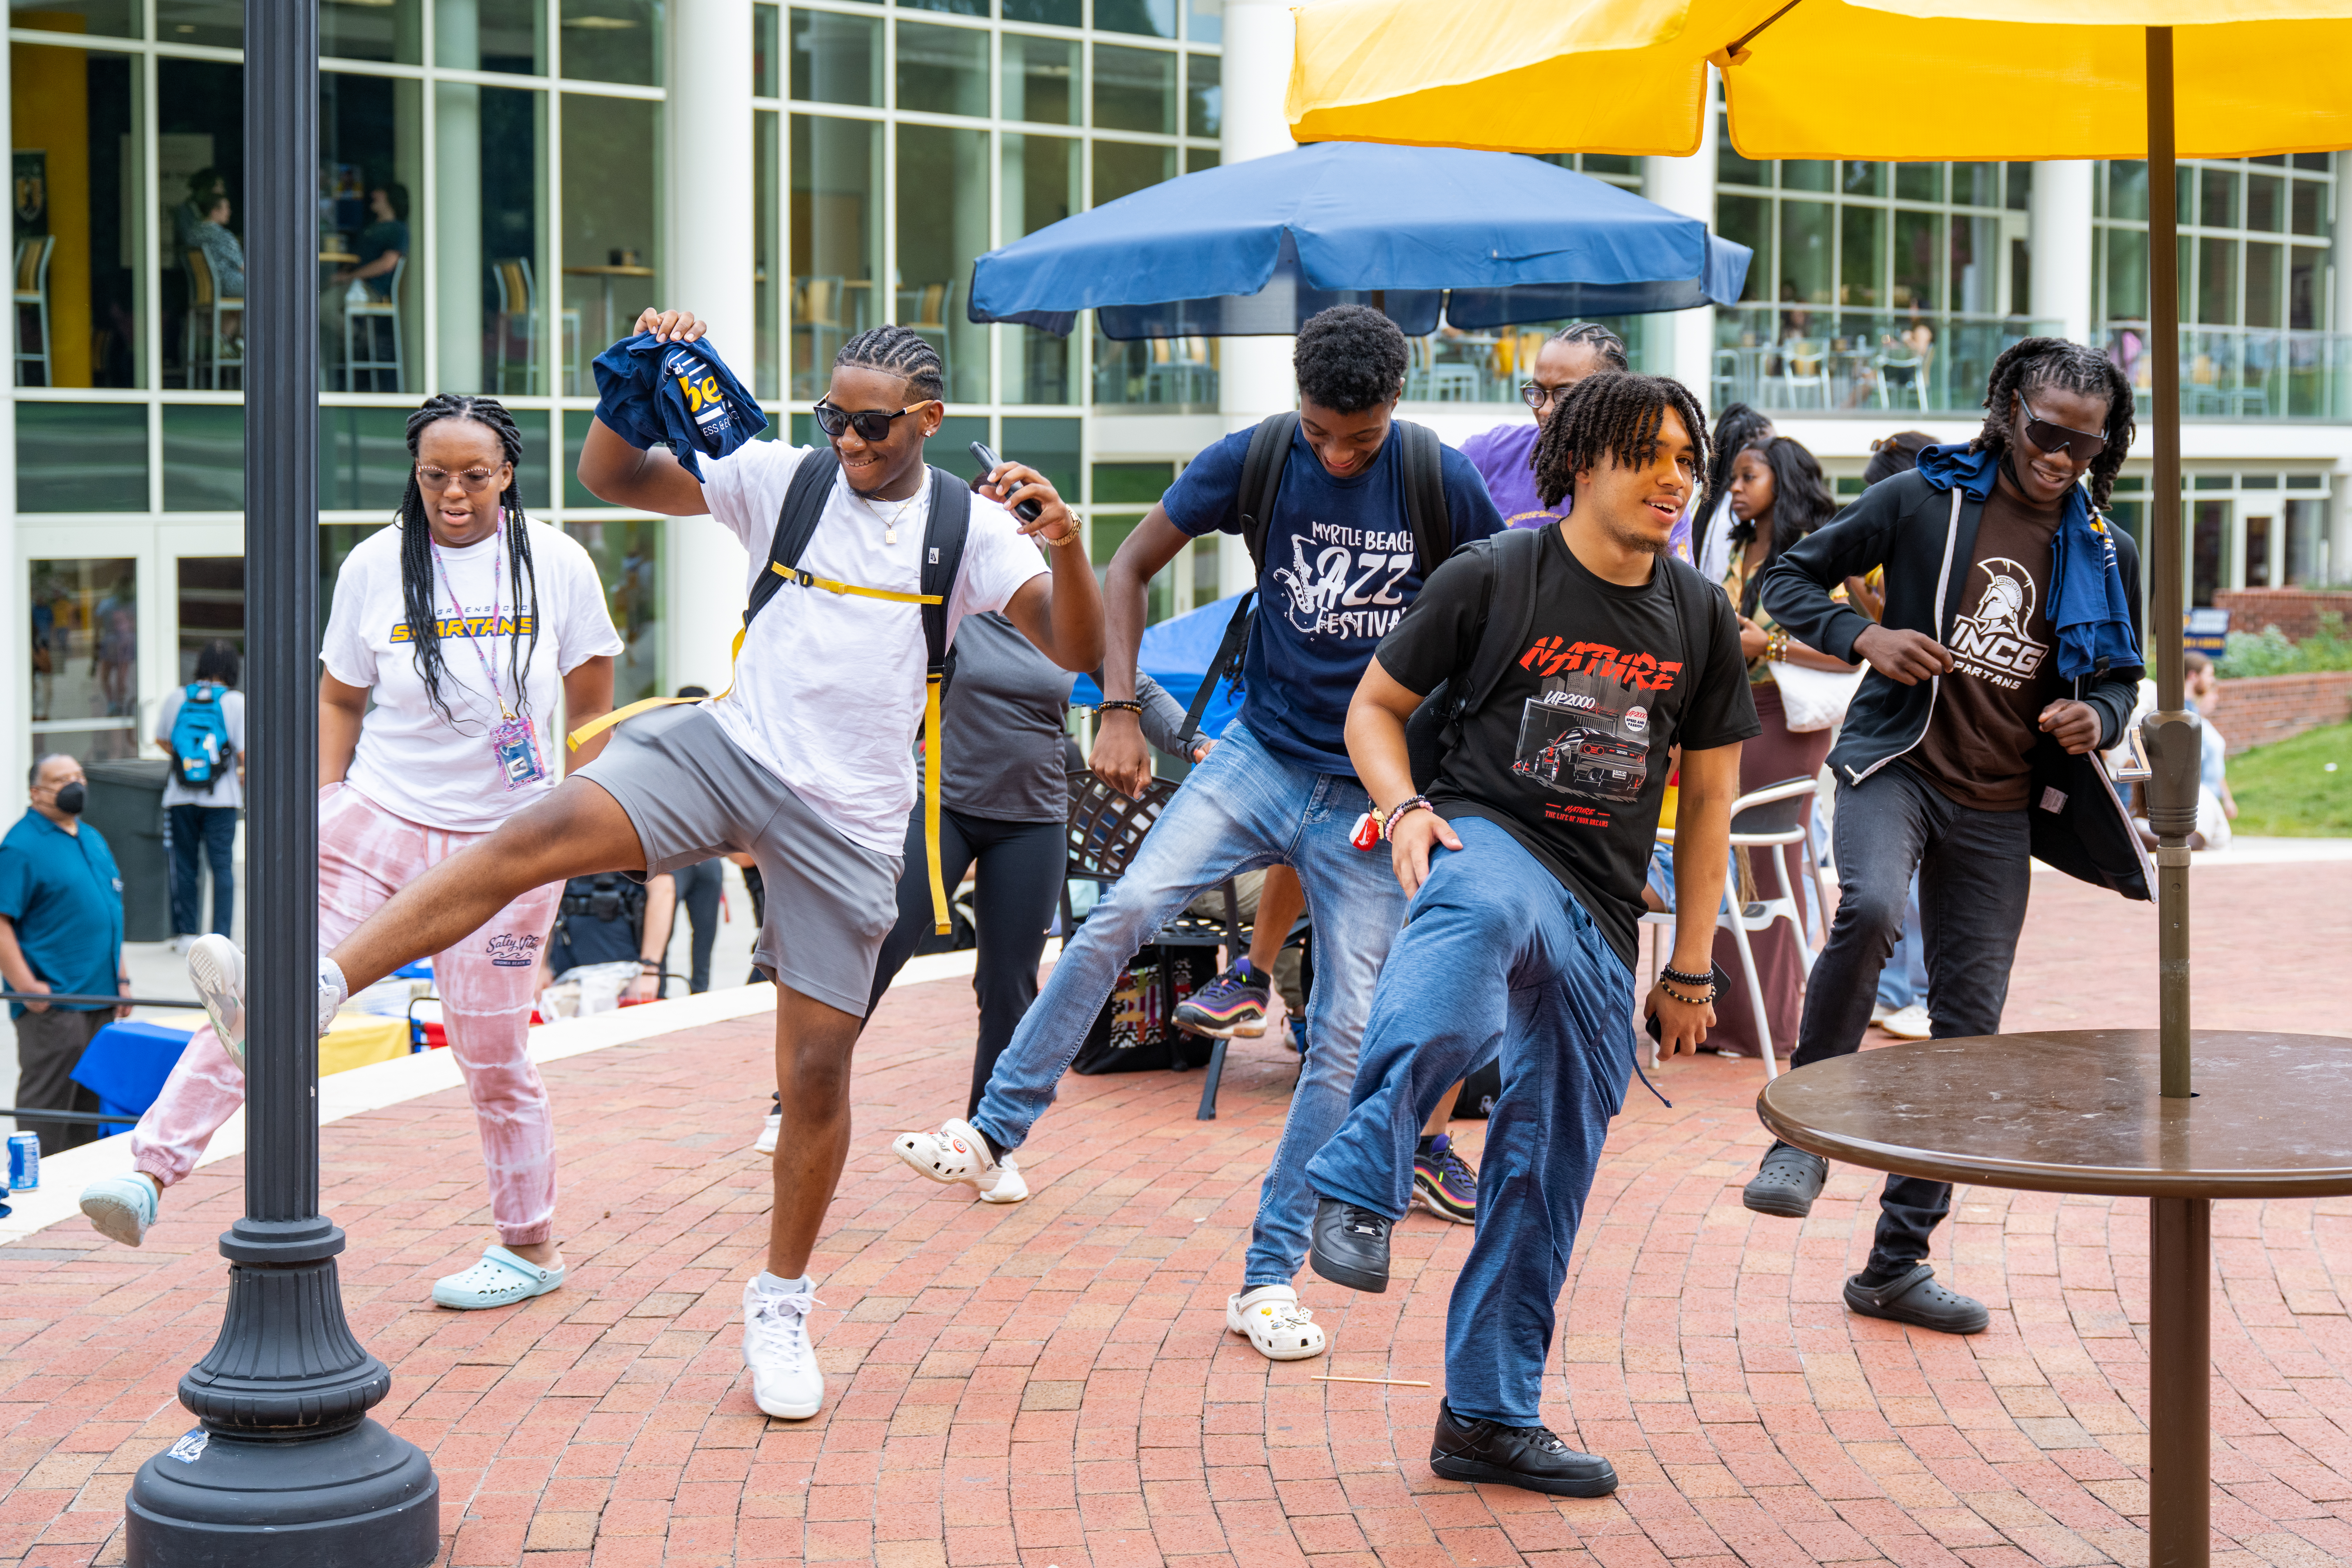 A group of students dancing outside near tables with umbrellas.